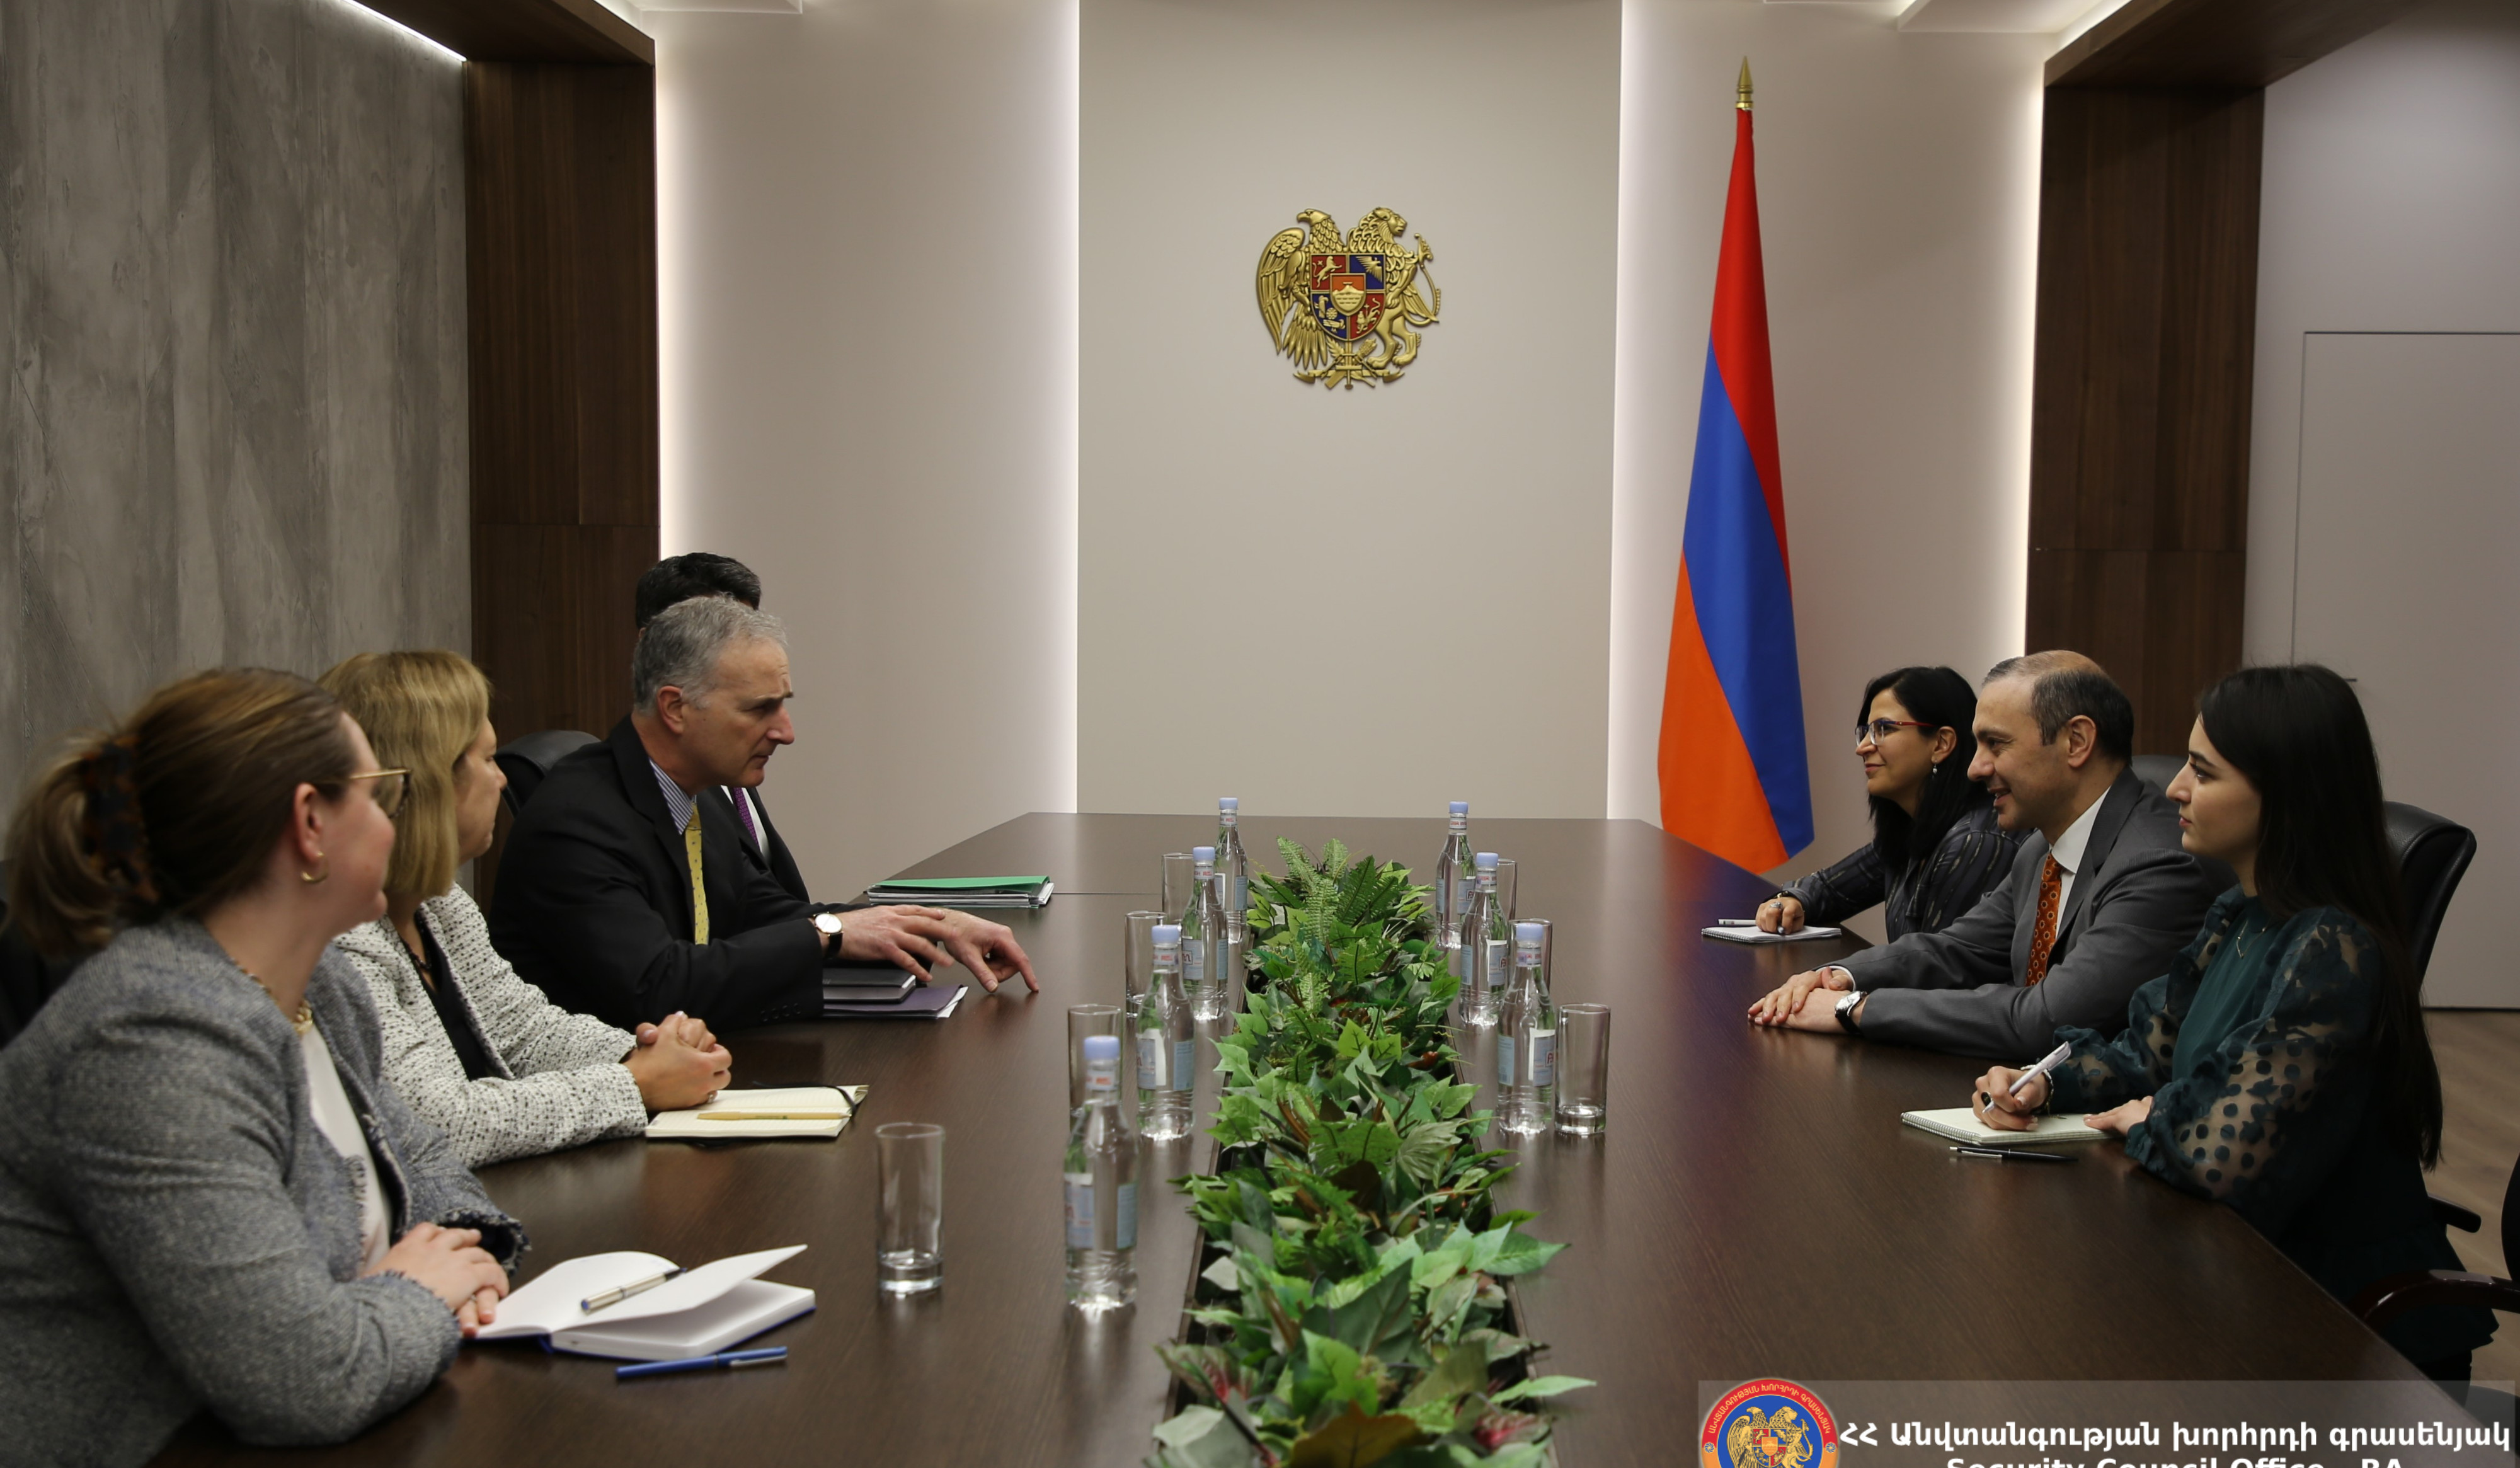 Secretary of Armenia's Security Council and Louis Bono exchanged ideas on negotiation process for settlement of Armenian-Azerbaijani relations